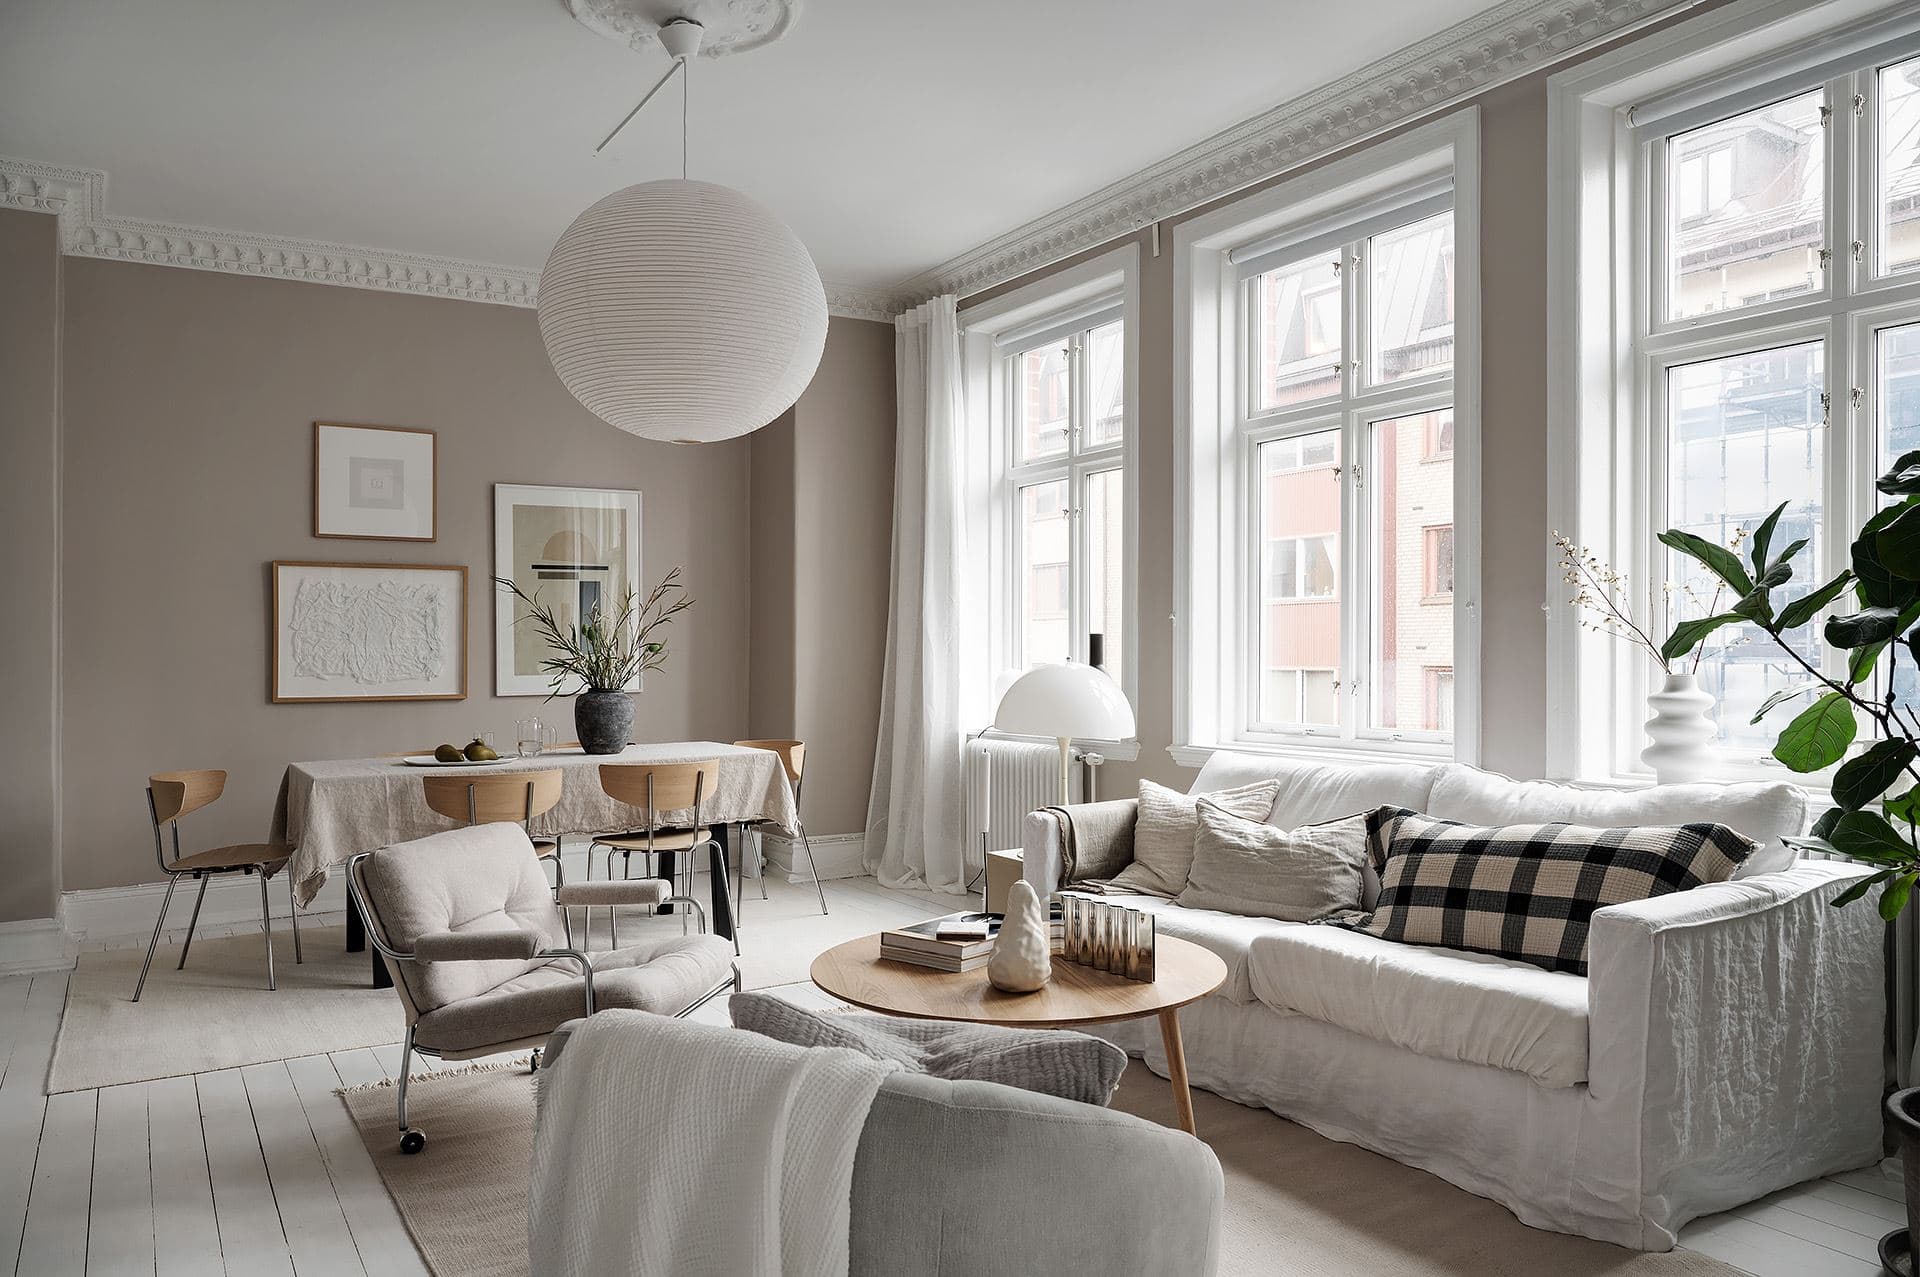 Beautiful turn-of-the-century home in warm grey - COCO LAPINE ...